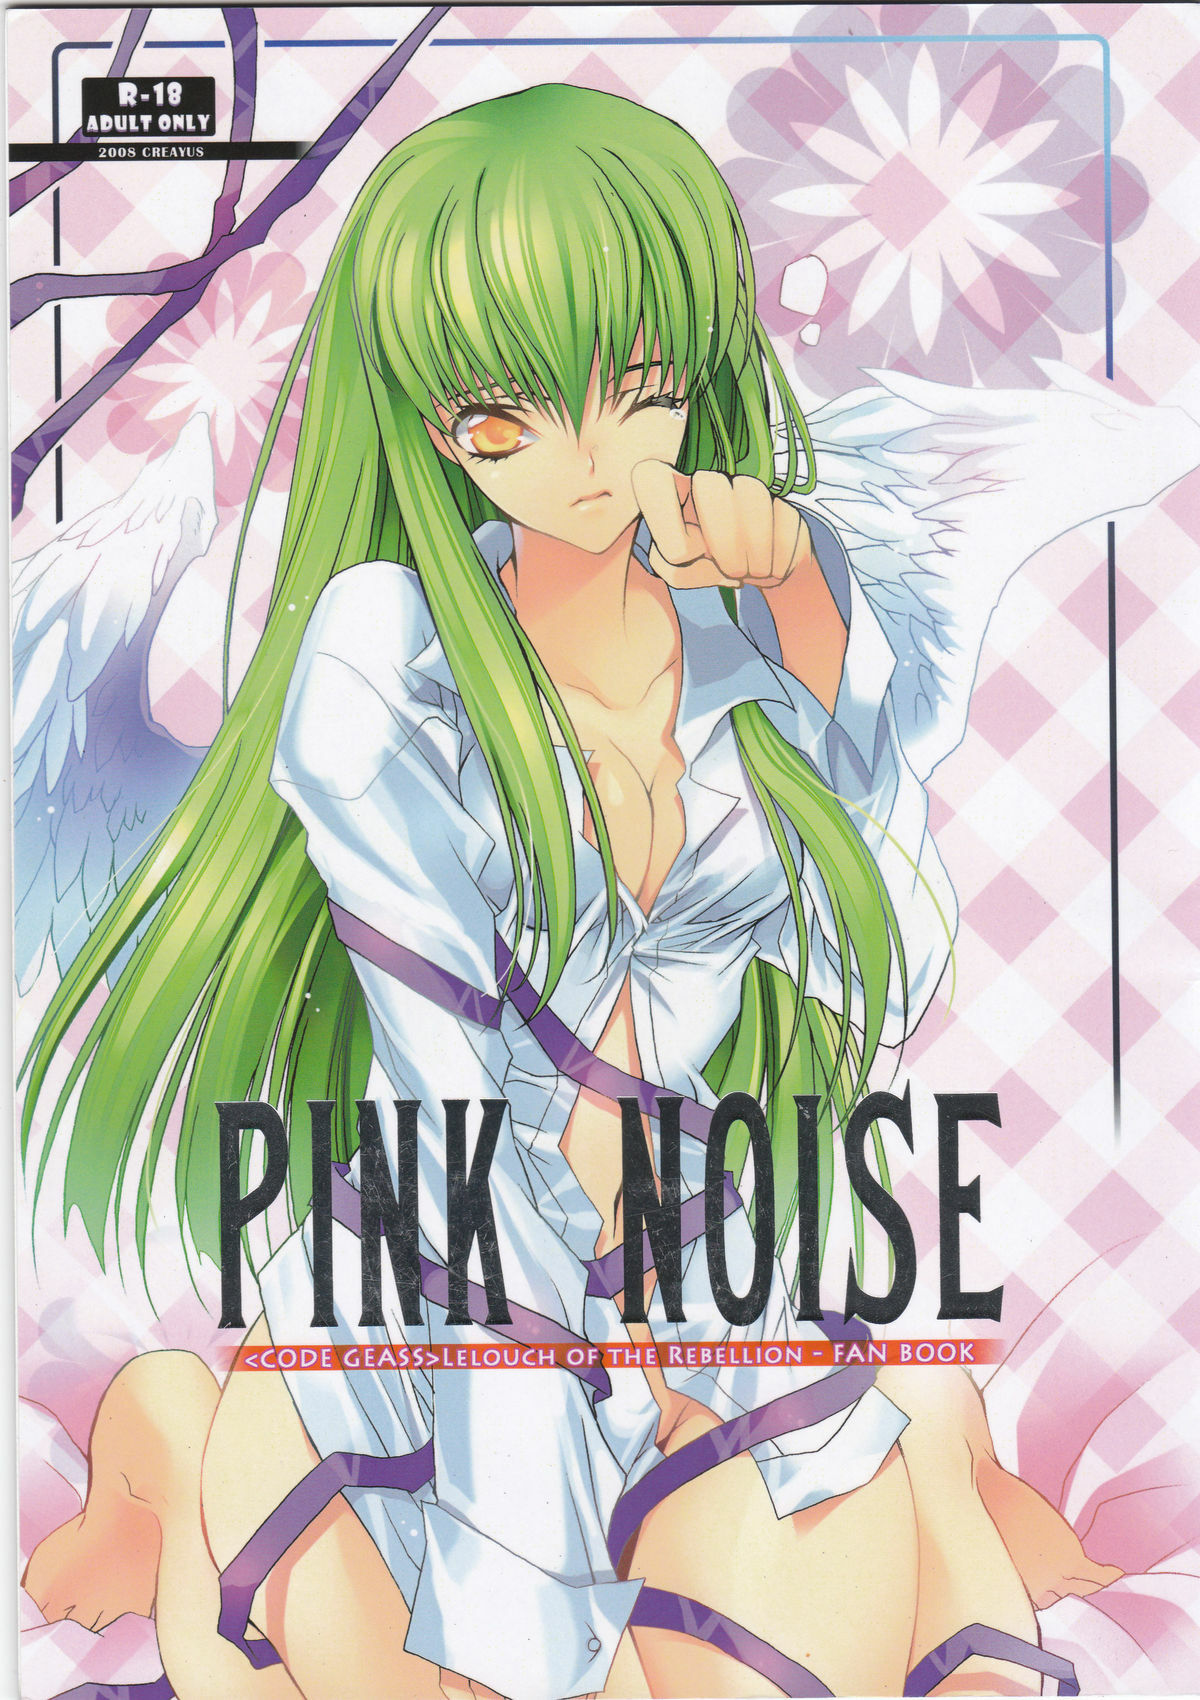 [CREAYUS (Rangetsu)] Pink Noise (CODE GEASS: Lelouch of the Rebellion) [Chinese] [soulrr 個人漢化] page 1 full